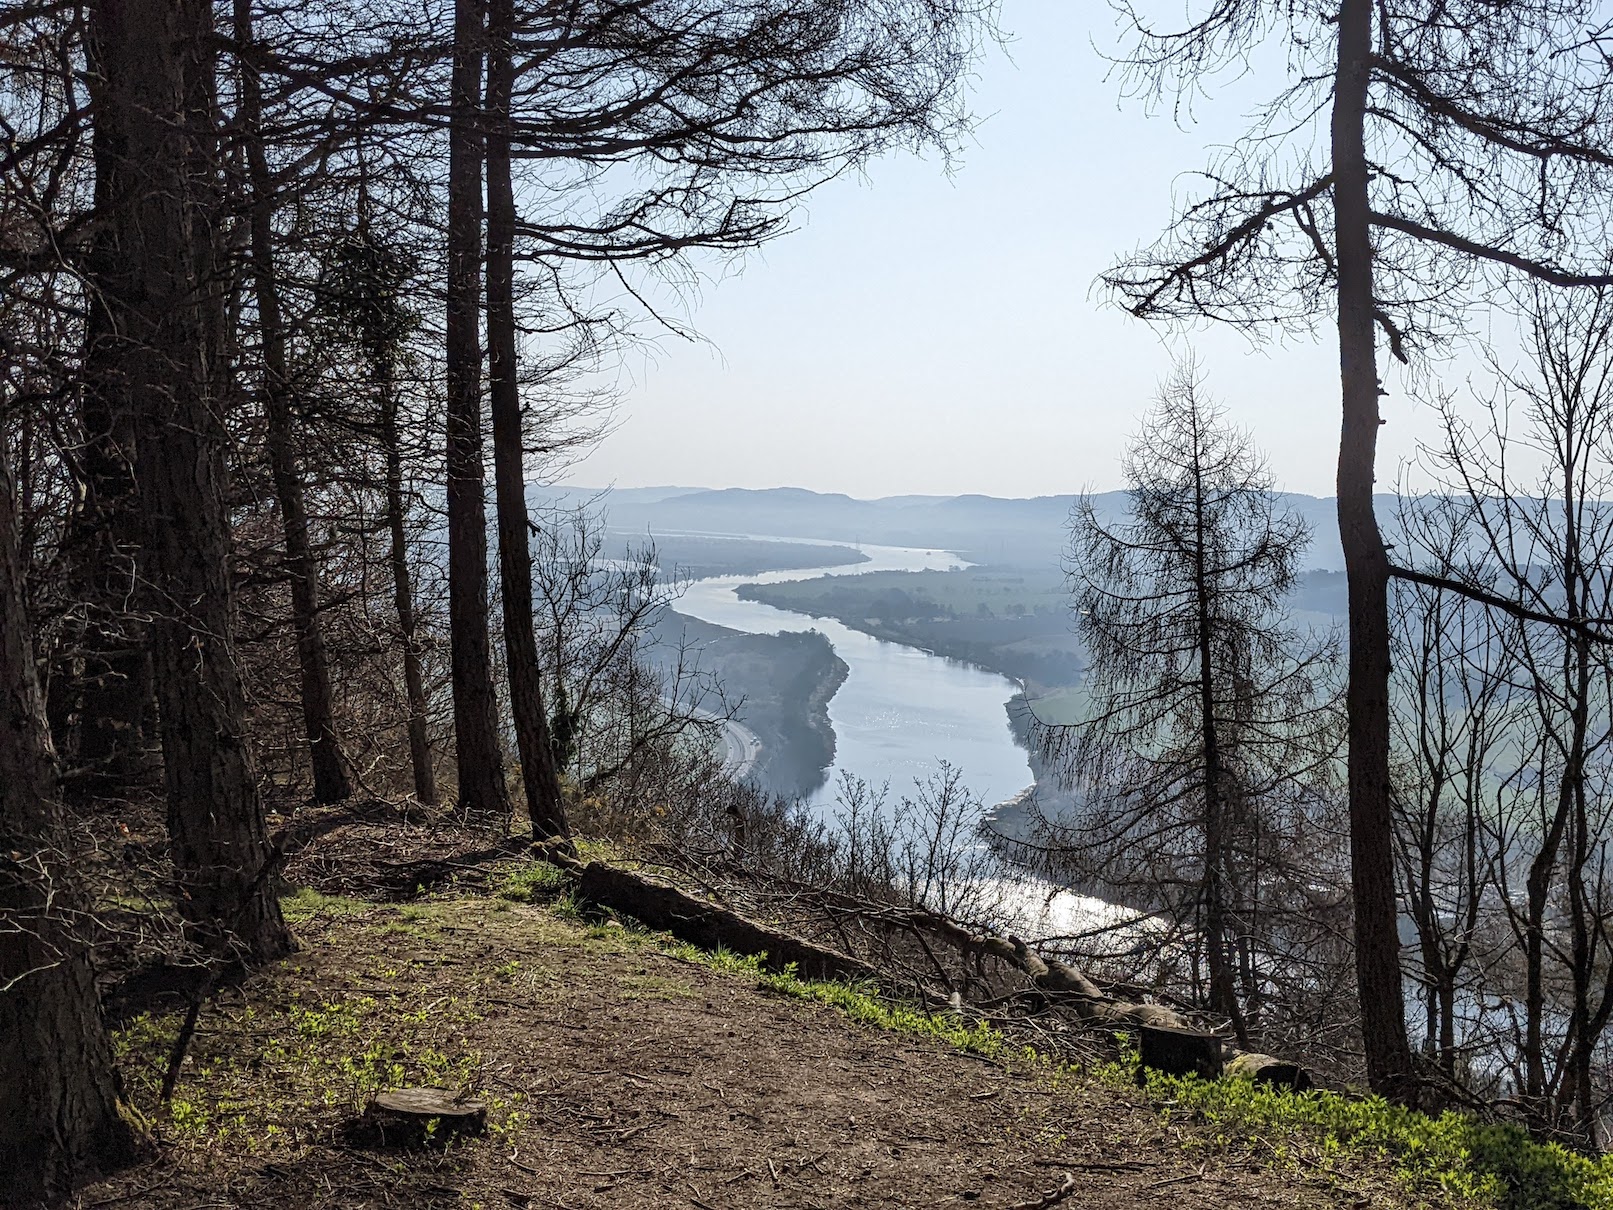 A view down the River Tay through some trees in a hilltop clearing.